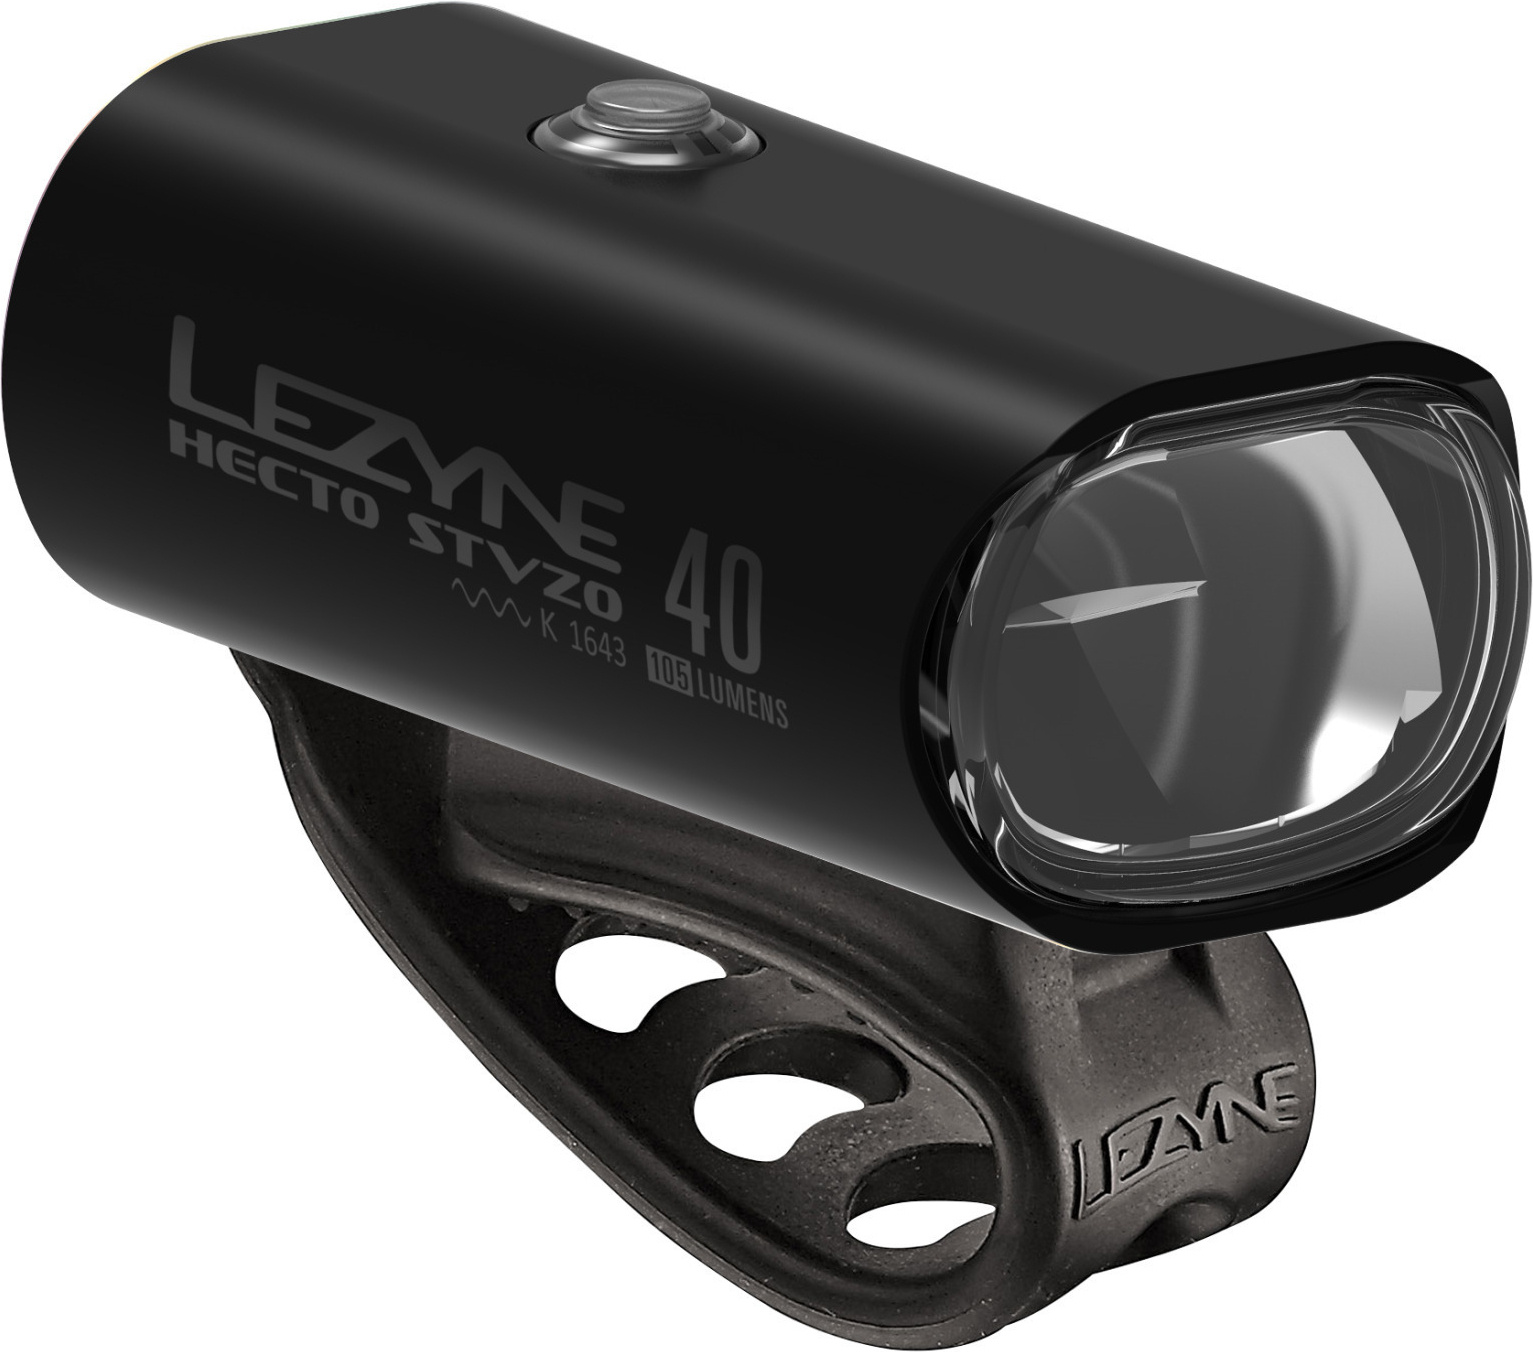 Image of Lezyne Hecto Drive 40 Front Light - German StVZO approved - matt black